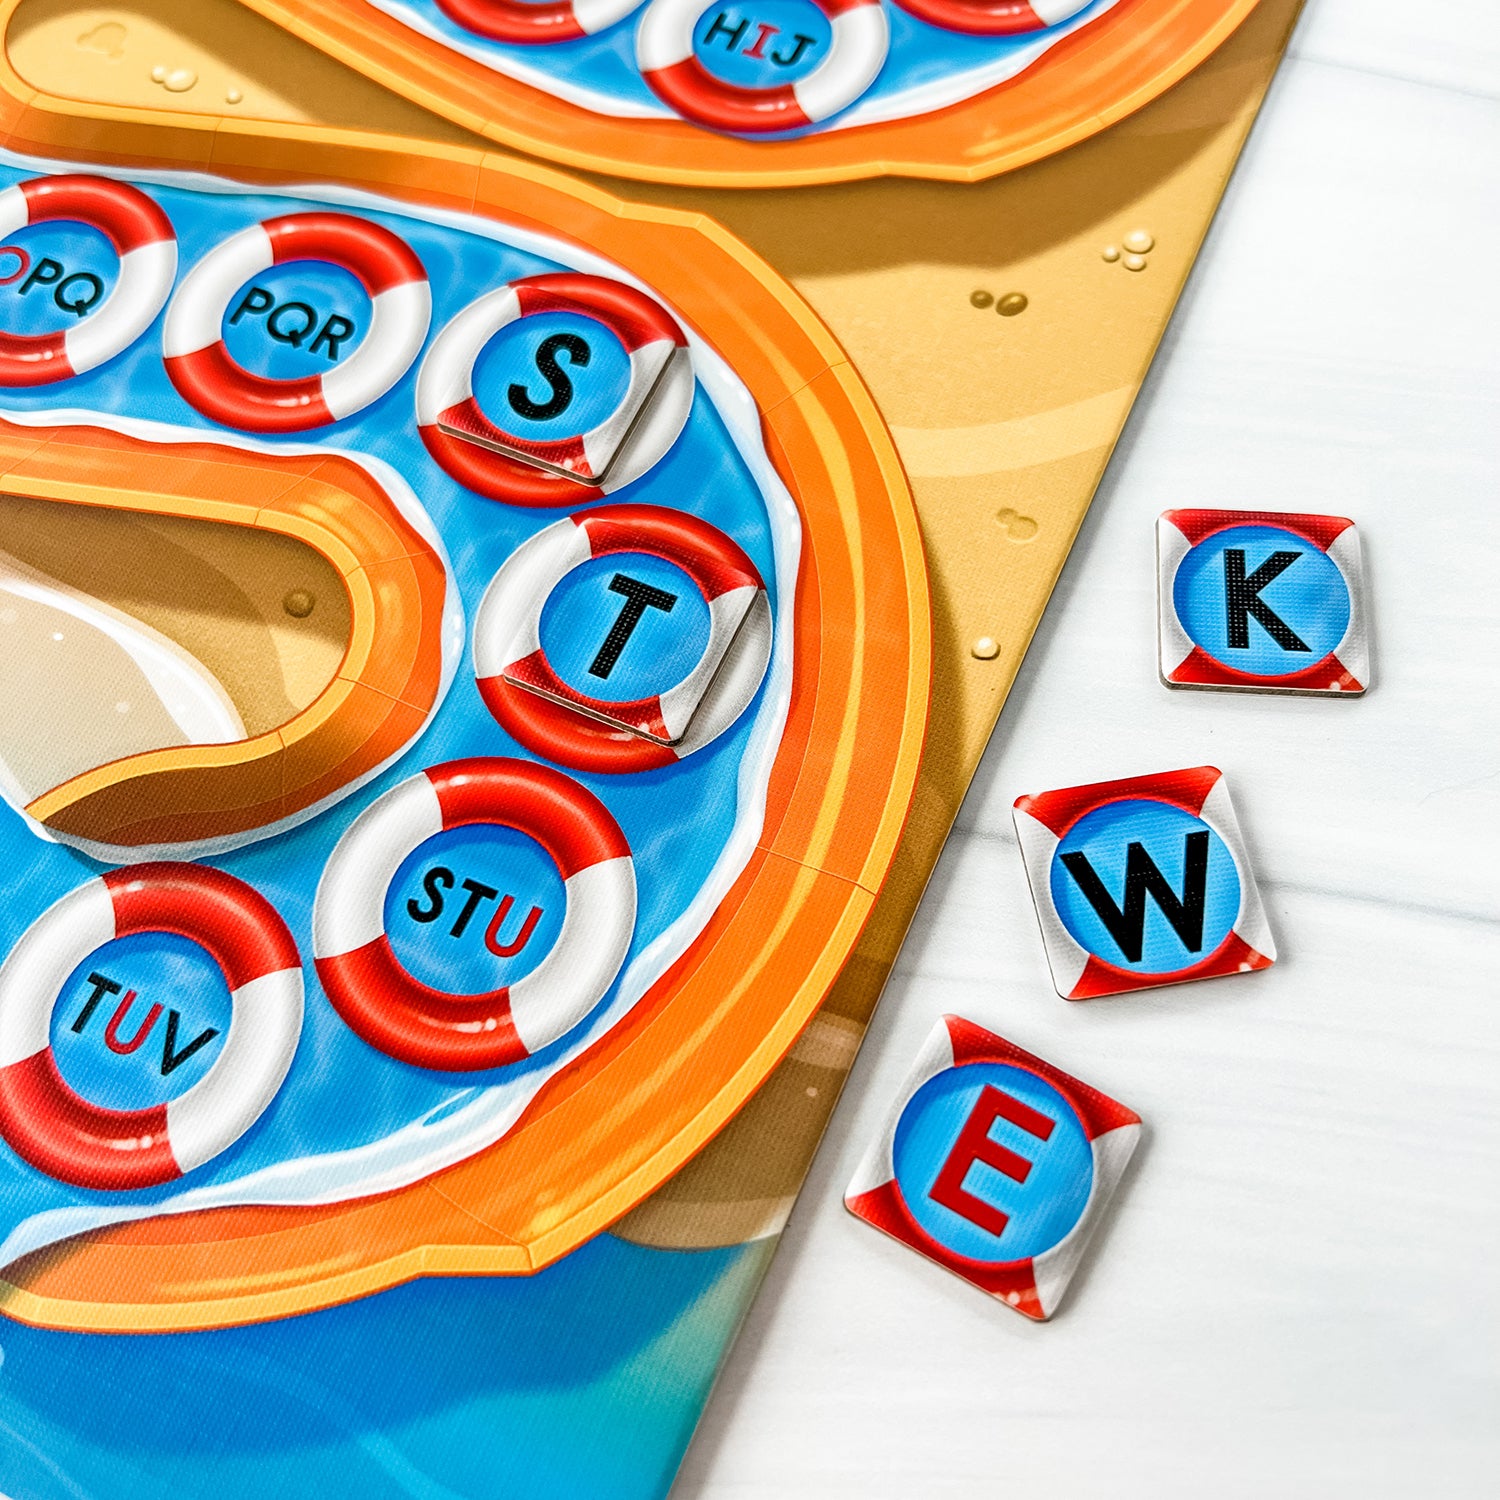 Letter Slide by SimplyFun is a fun spelling game that teaches vocabulary, consonants and vowels.